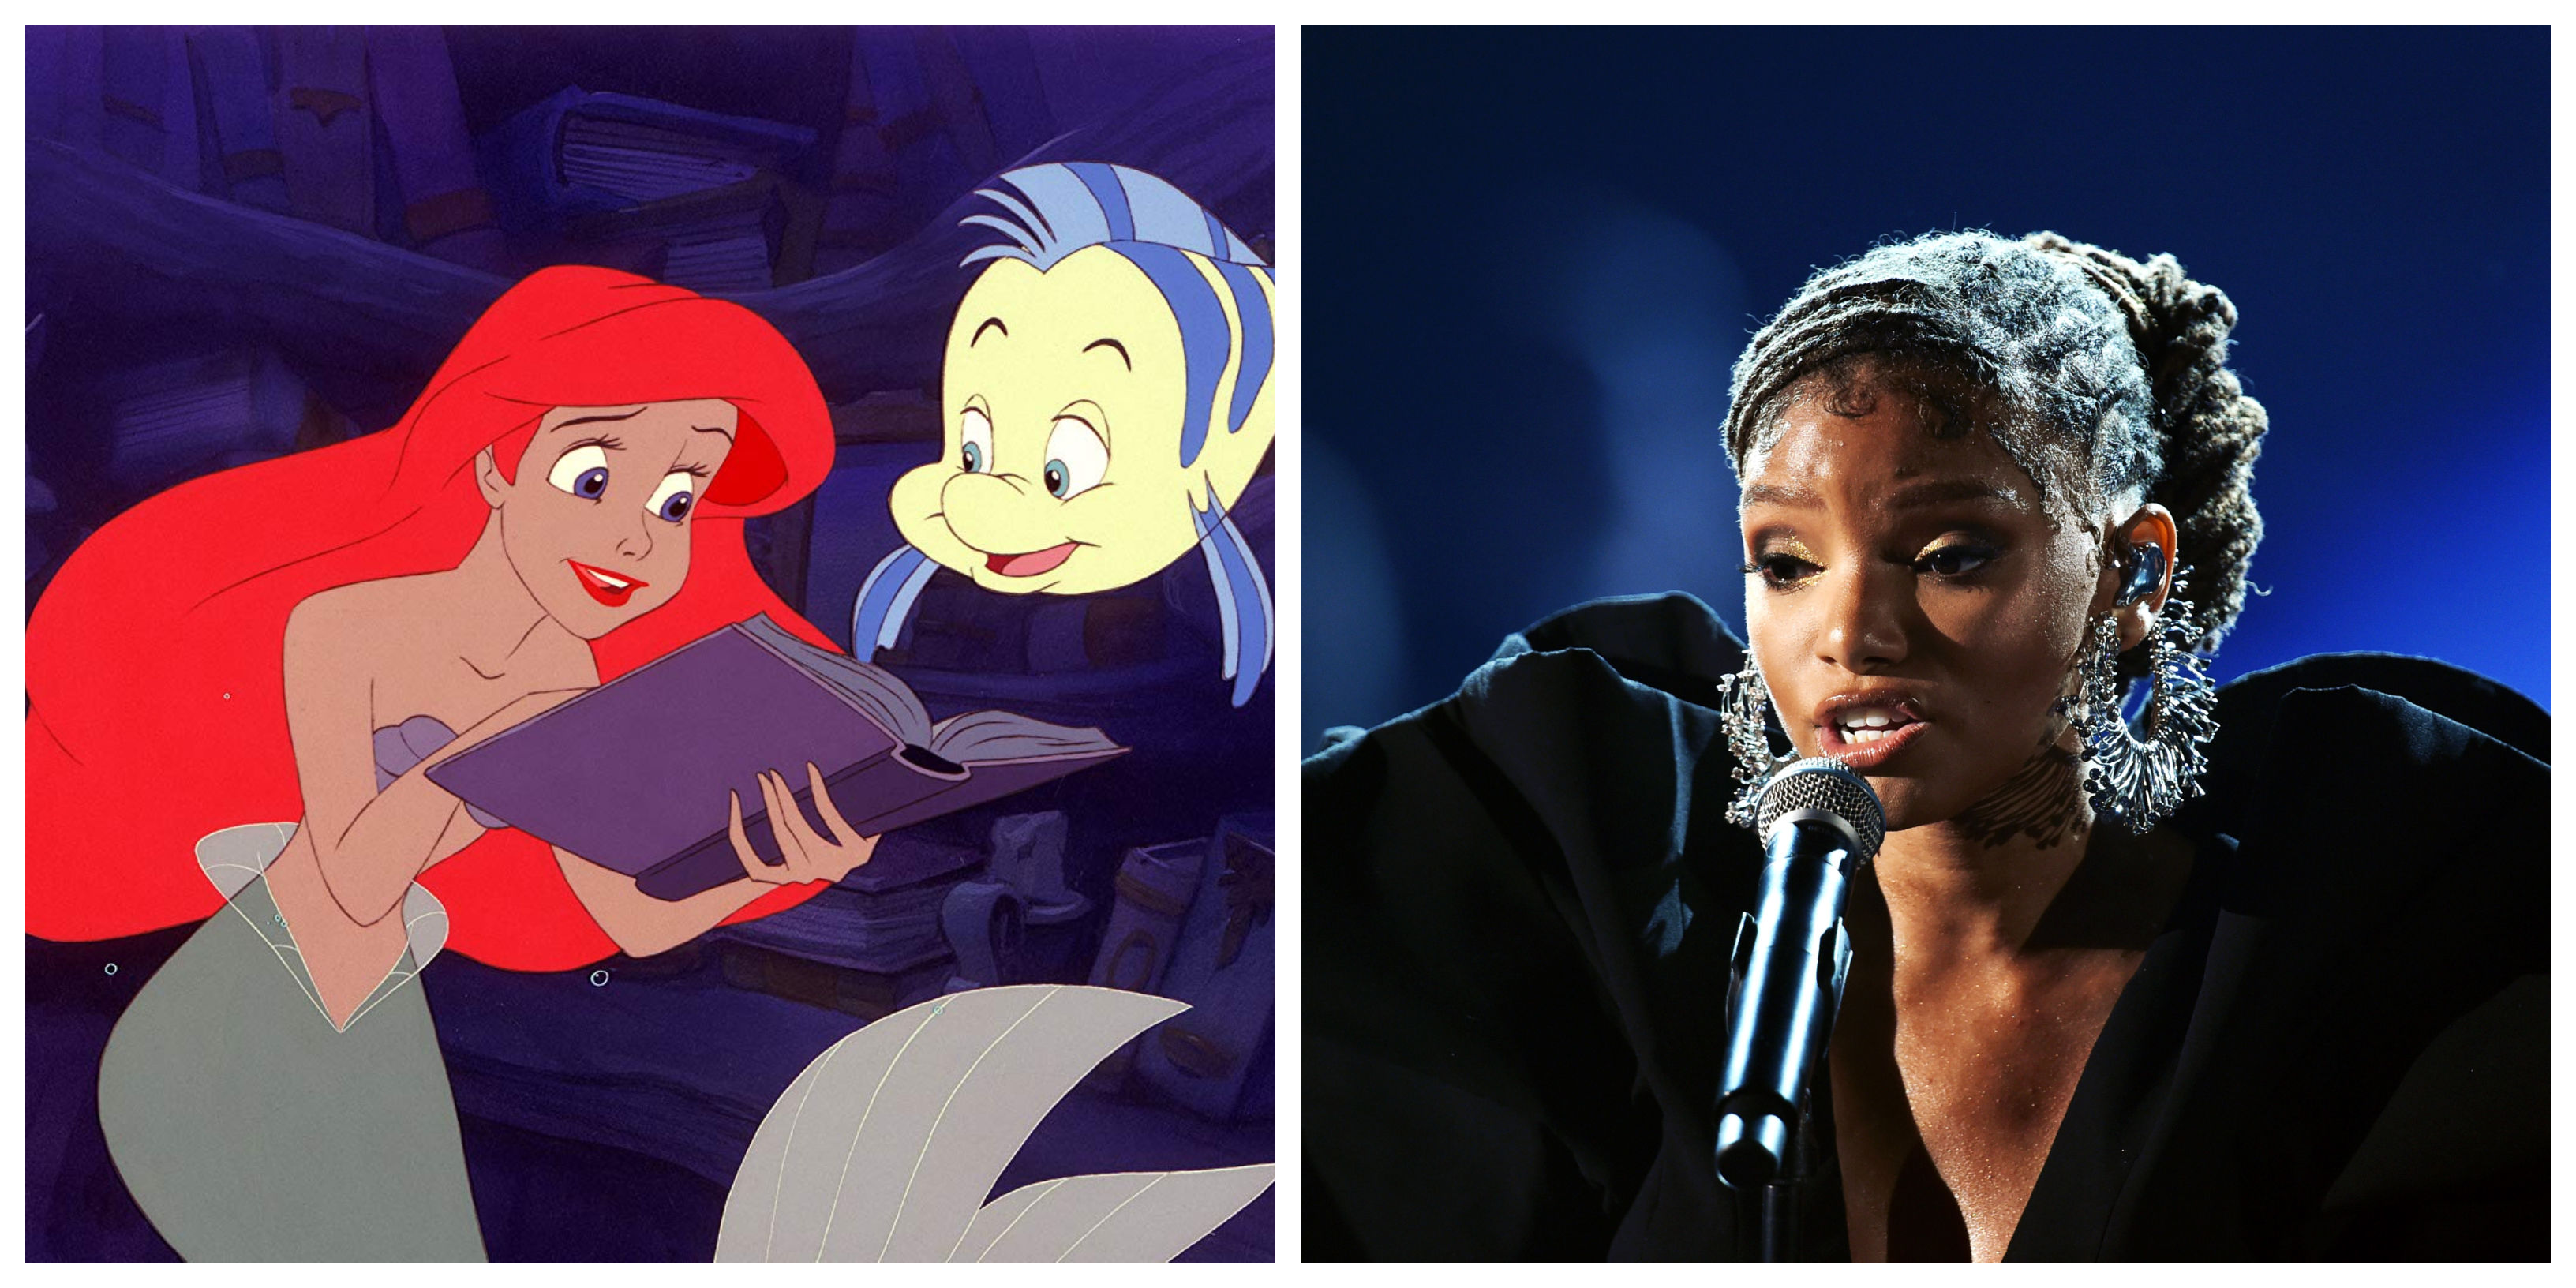 Disneys live-action The Little Mermaid casts Halle Bailey as Ariel SYFY WIRE